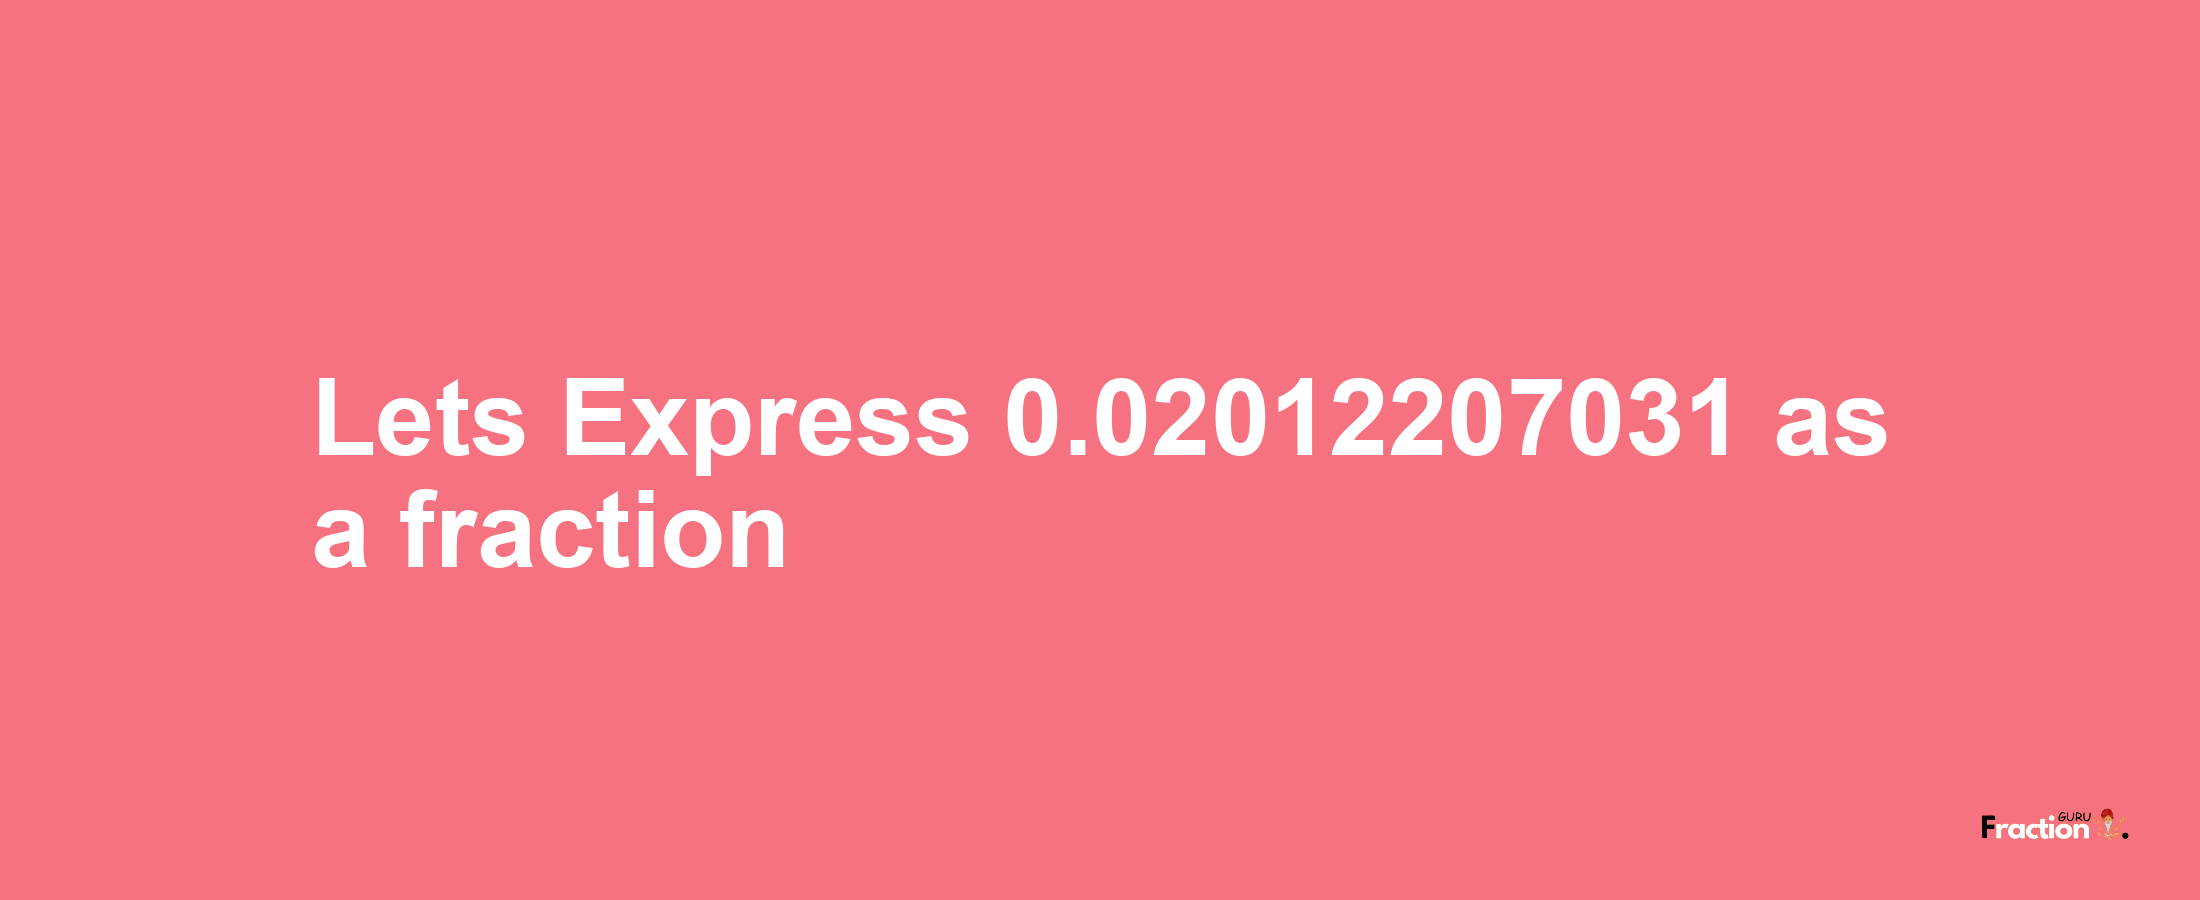 Lets Express 0.02012207031 as afraction